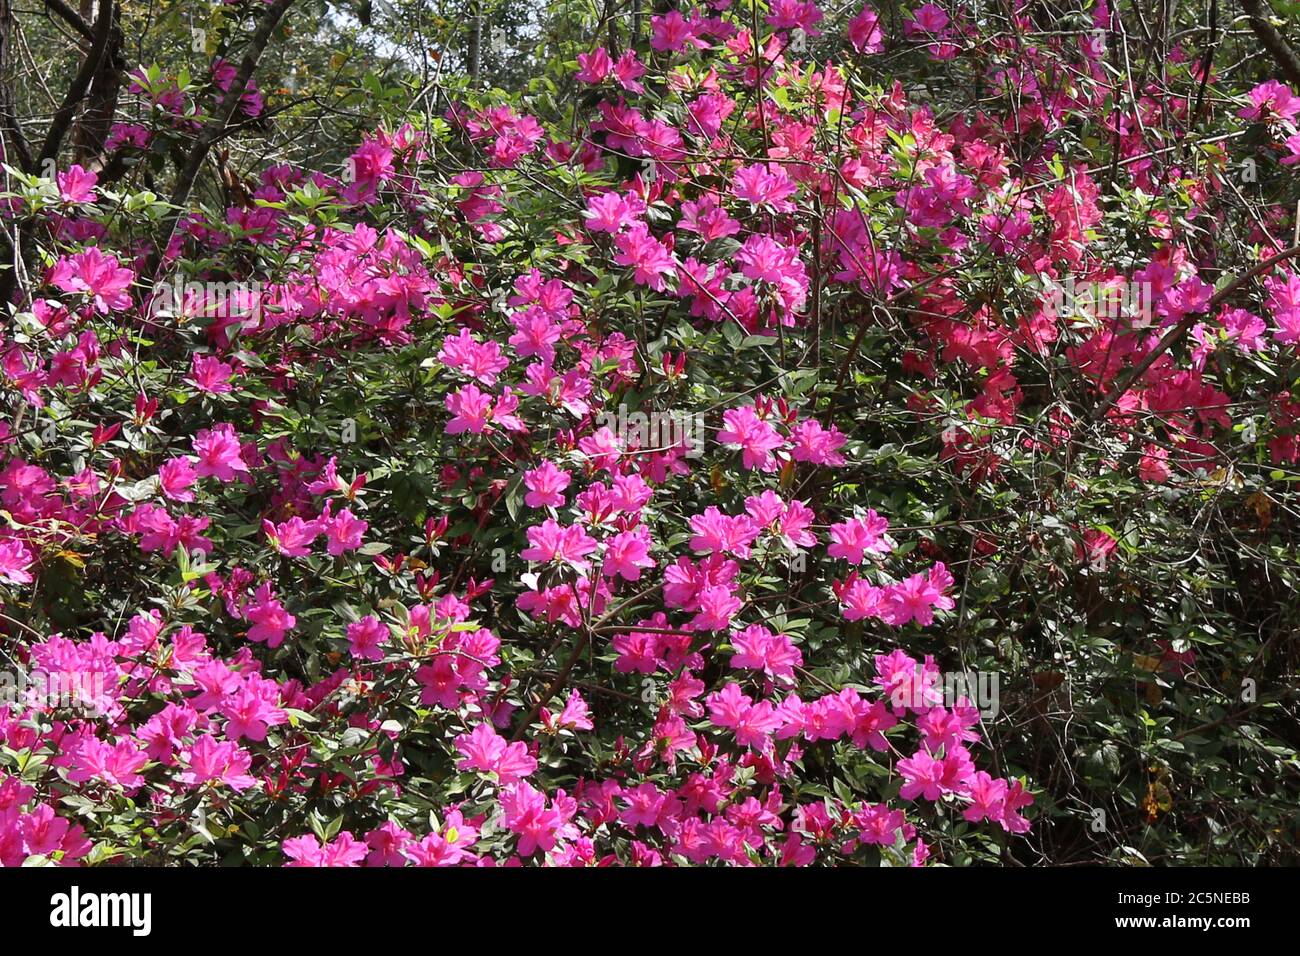 a bougainvillea garden hedge with lush pink purple blooming flowers Stock Photo